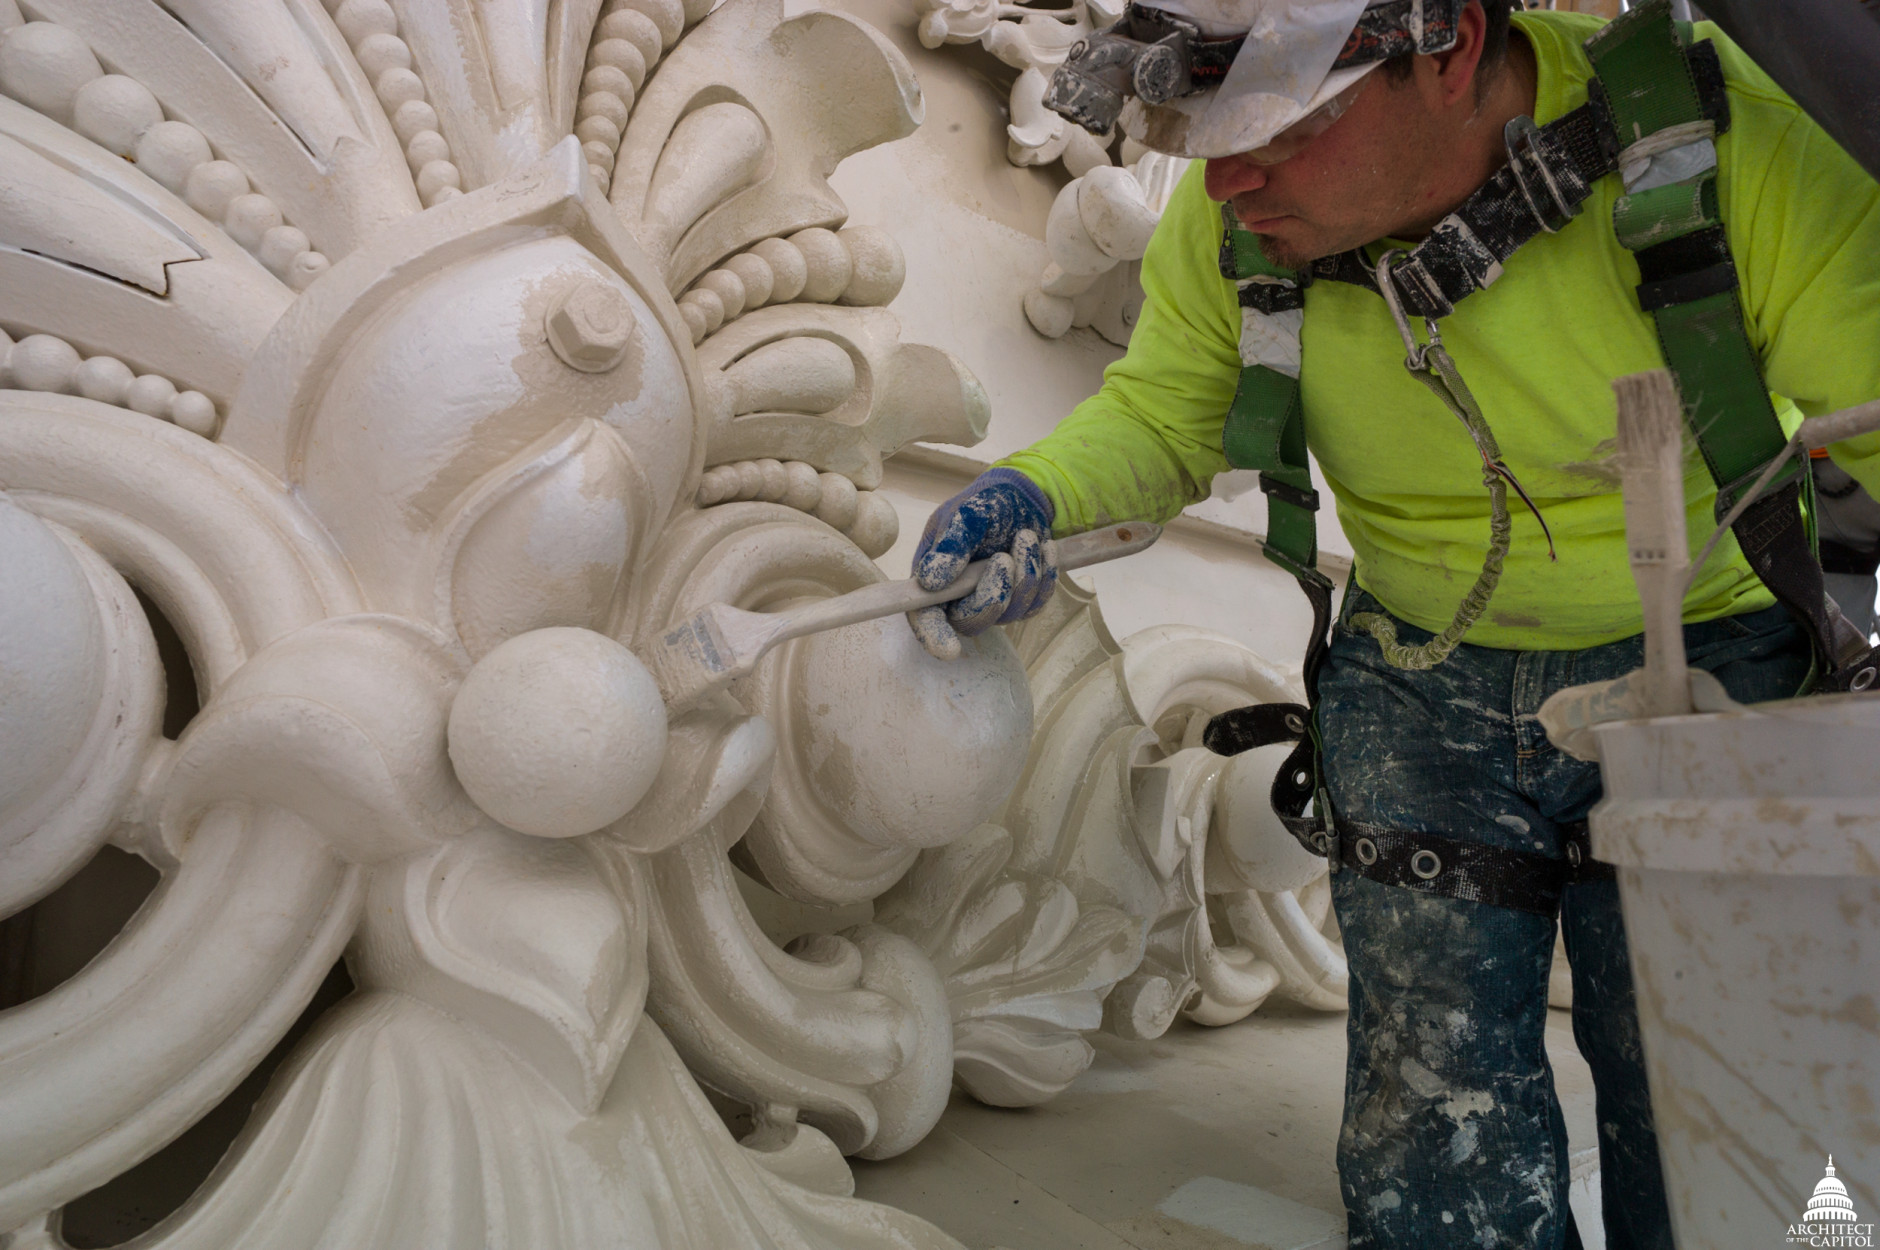 Workmen continue to refurbish the Capitol dome in March 2016. (Architect of the Capitol)